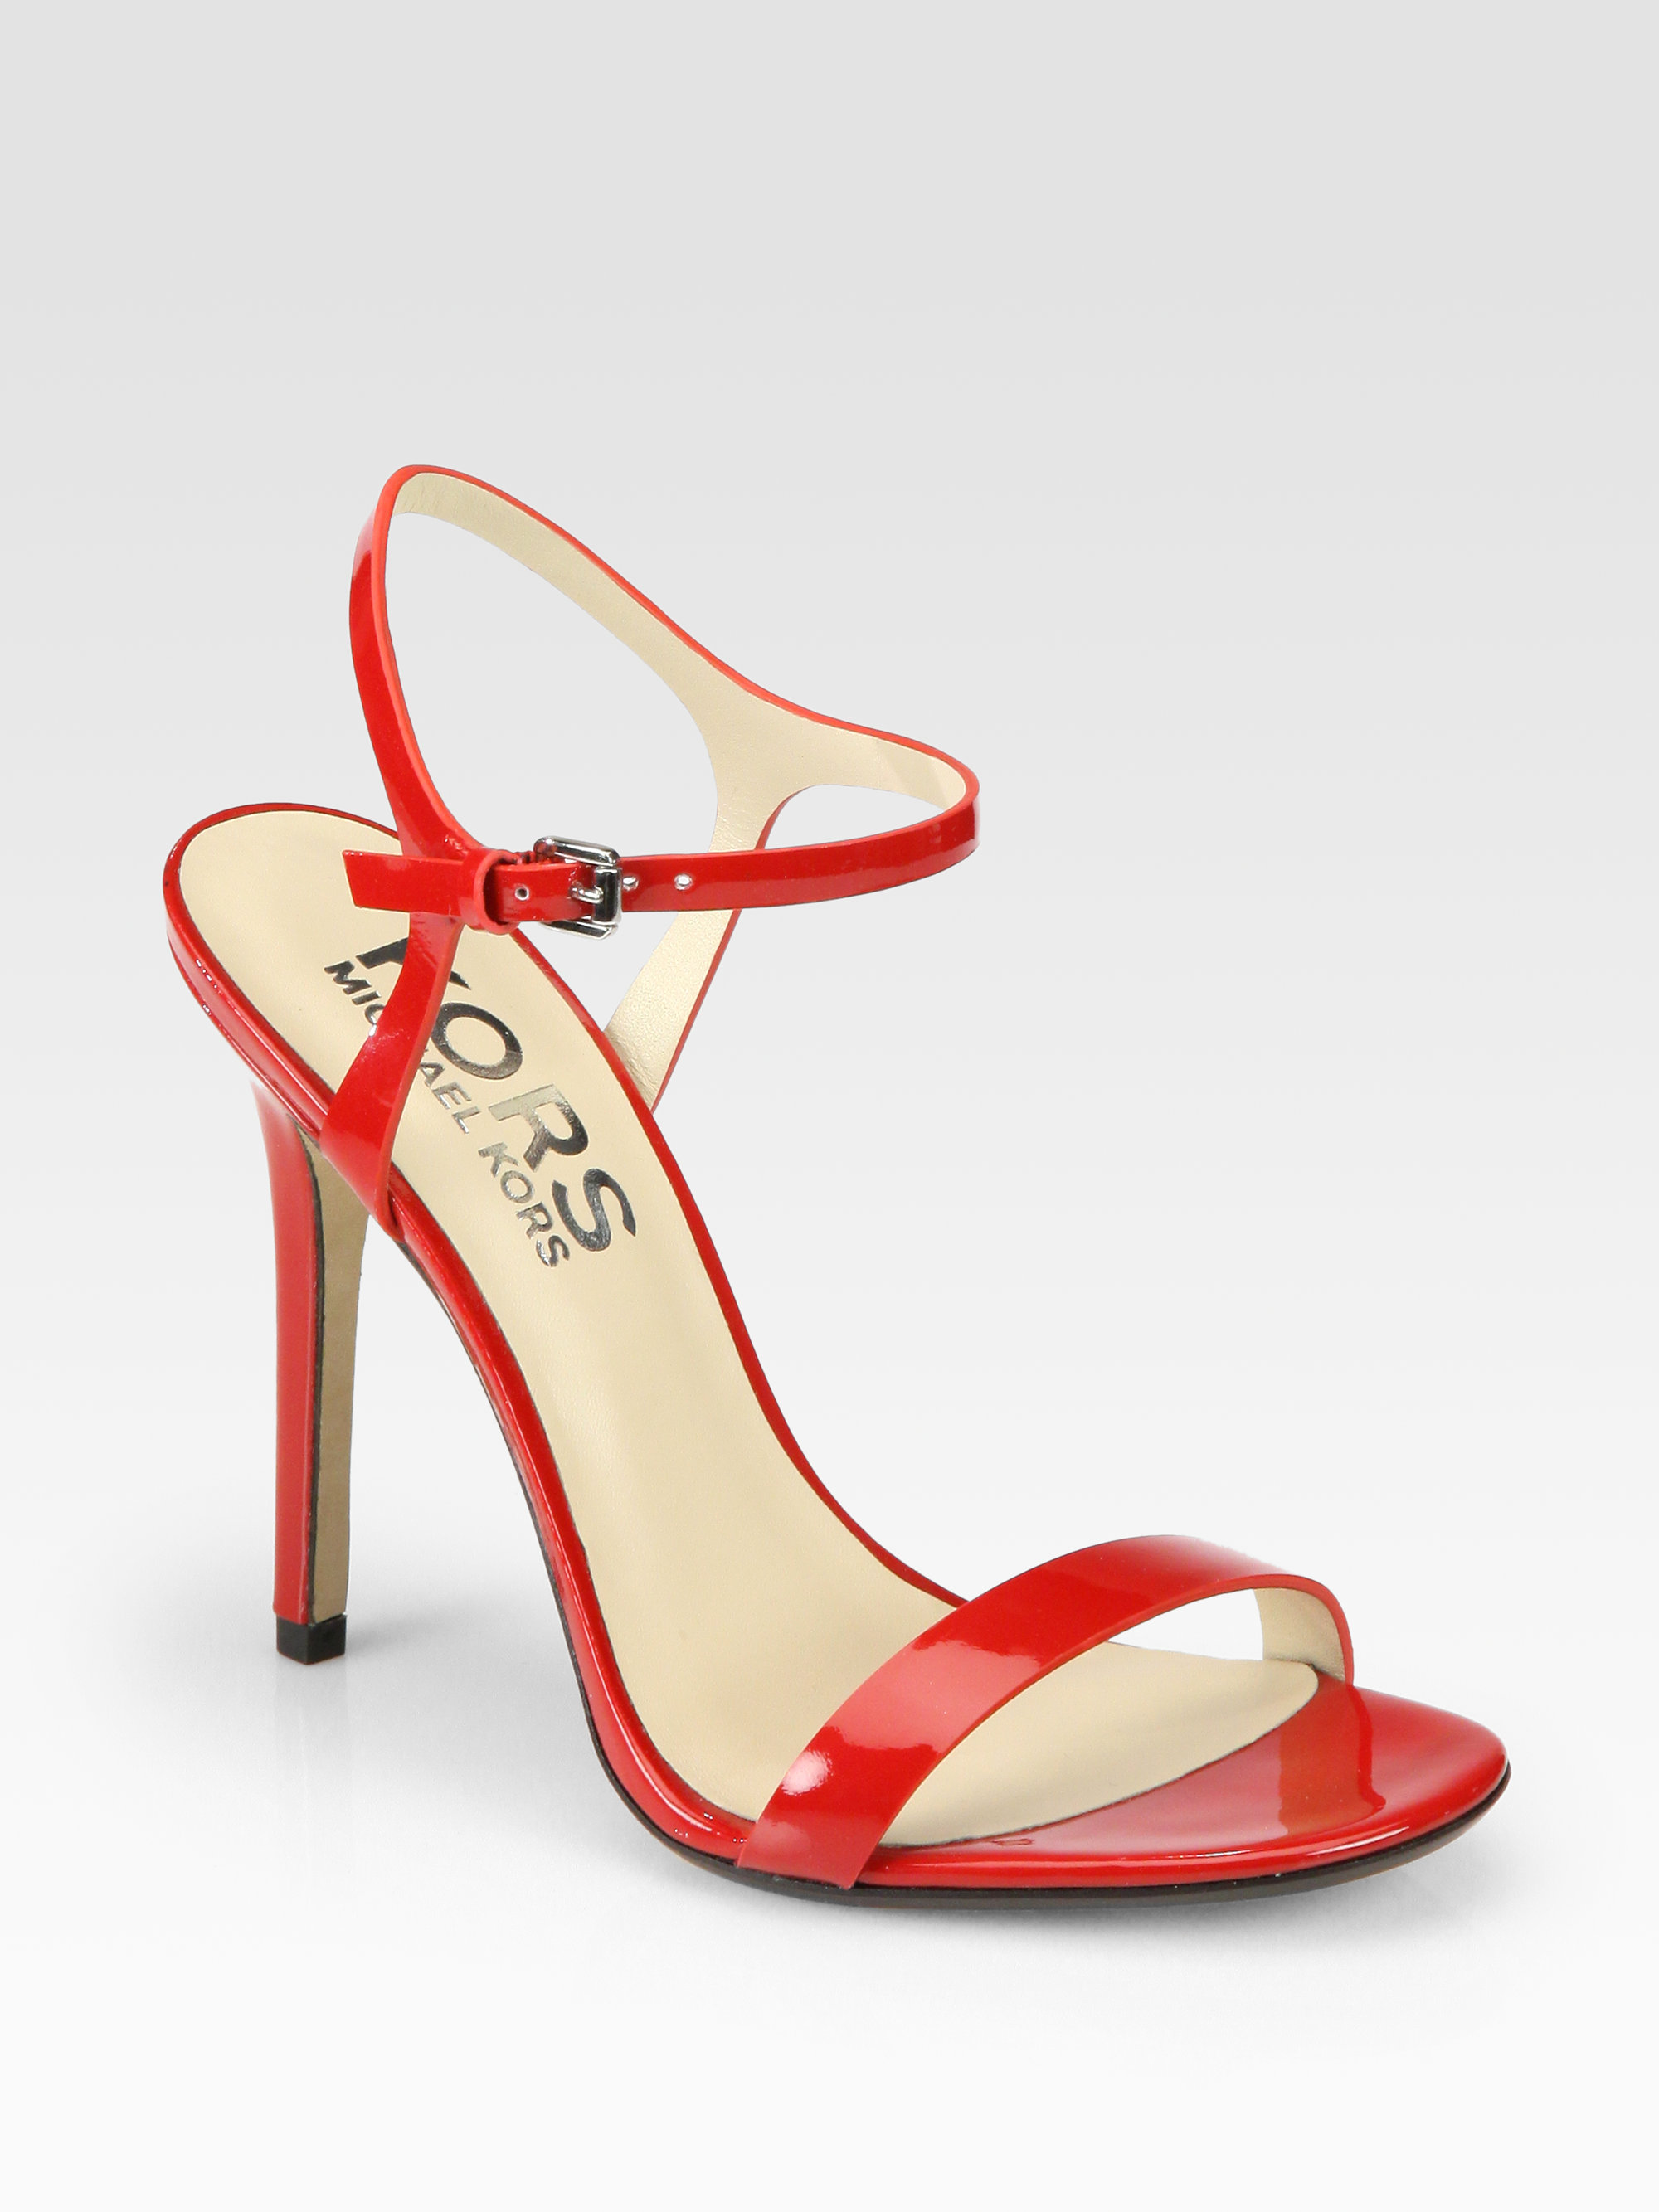 Kors By Michael Kors Mikaela Patent Leather Ankle Strap Sandals in Red ...